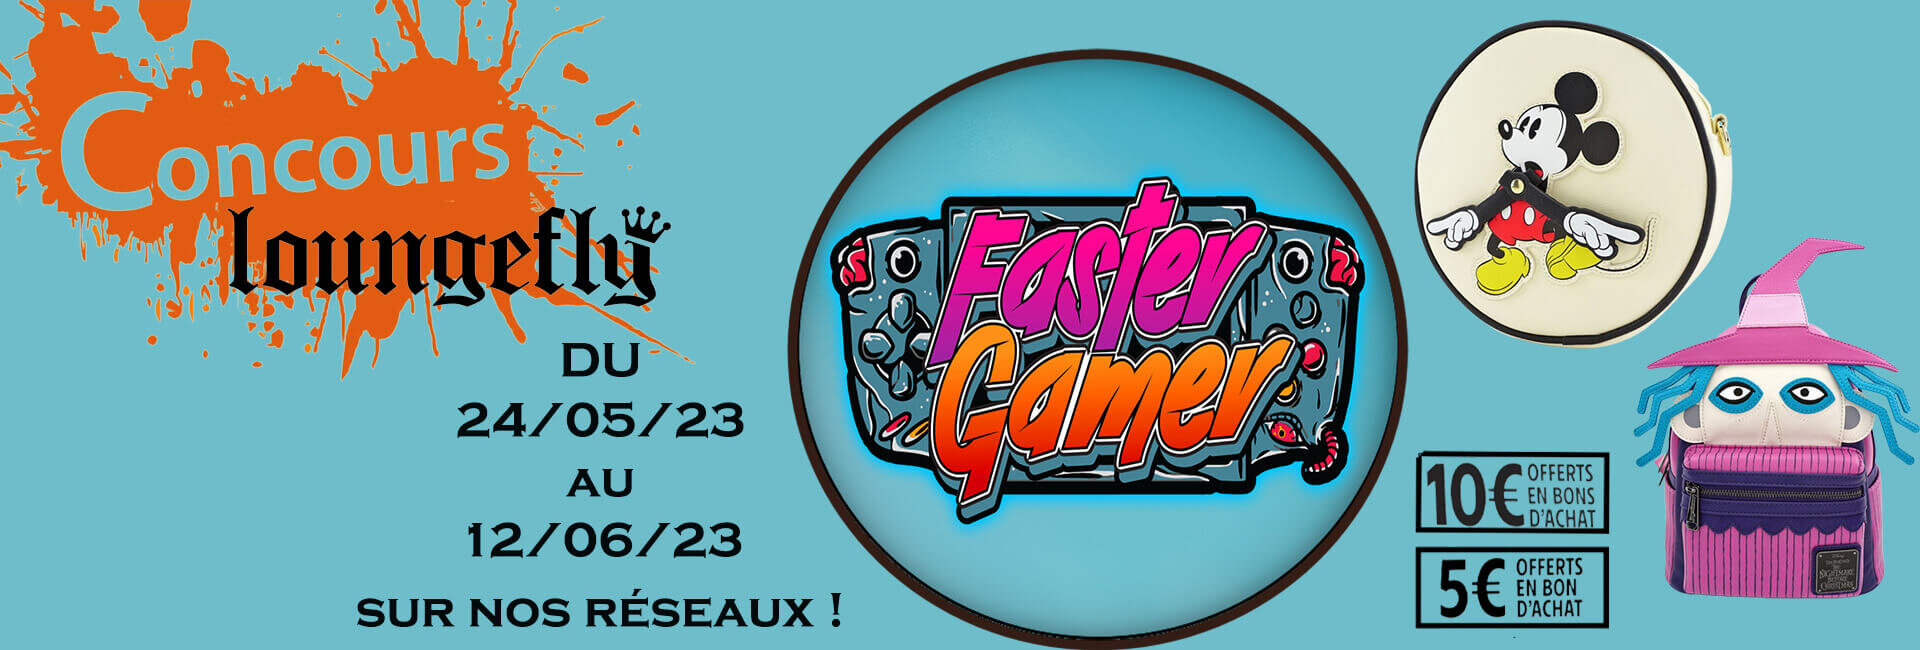 Banniere-concours-loungefly-2-1-